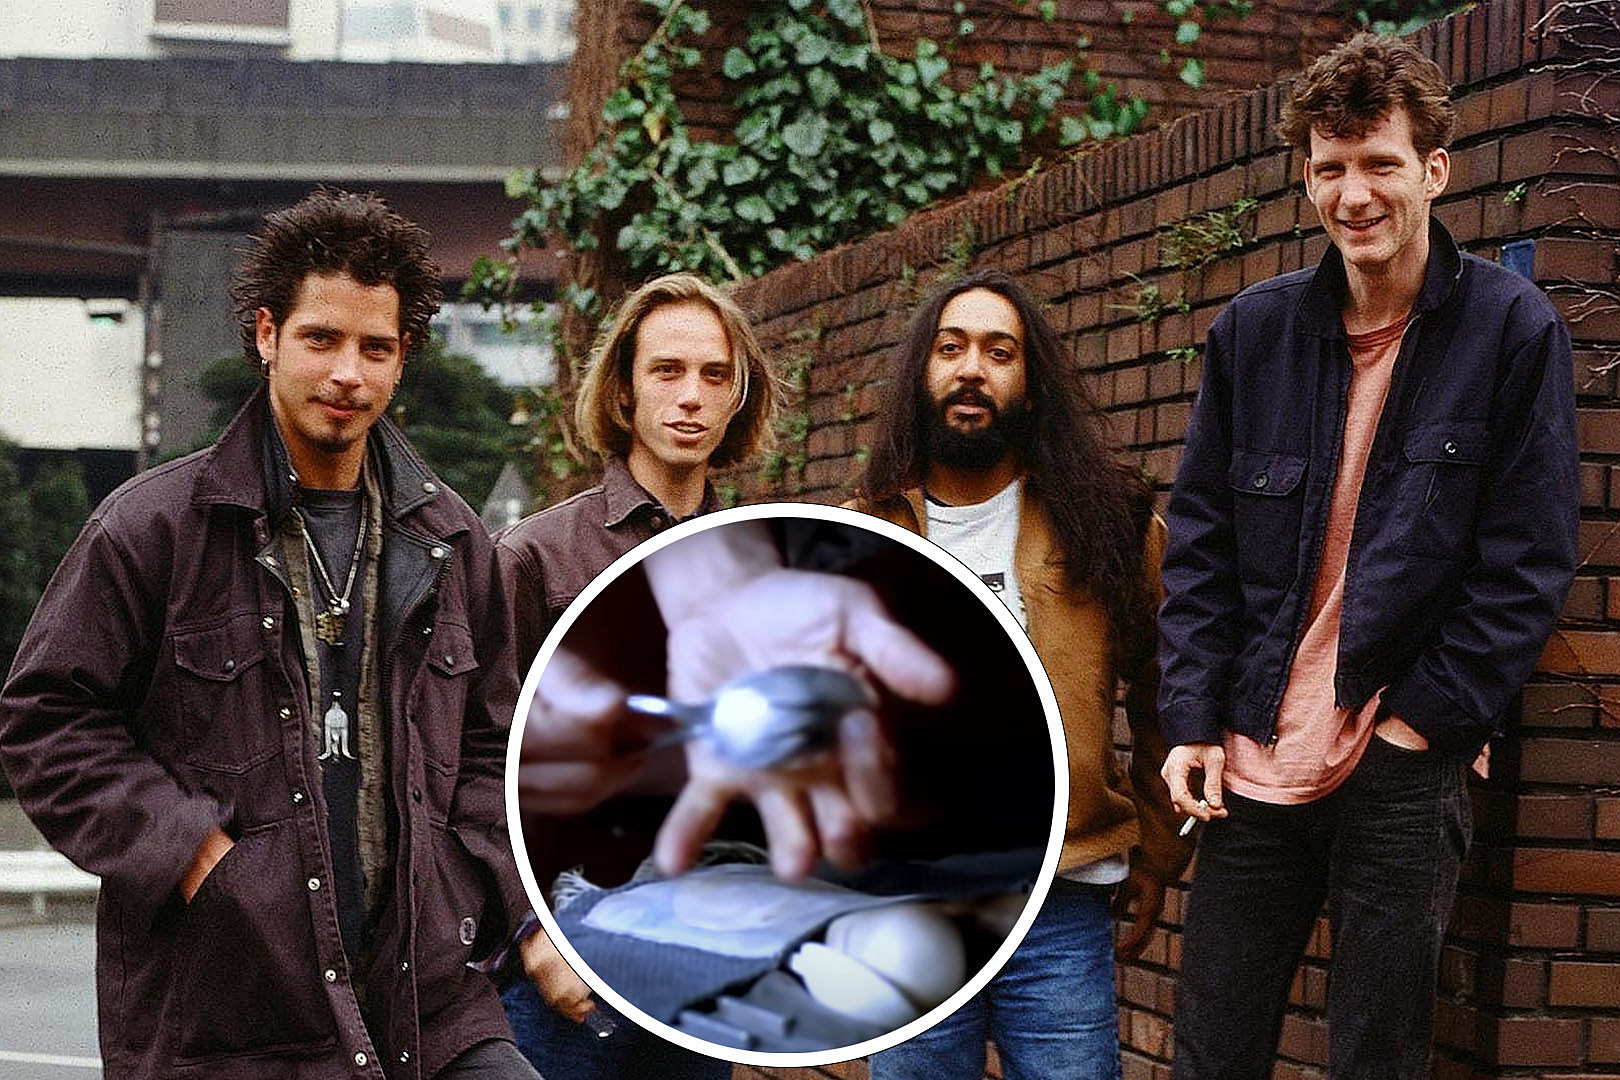 What Is Soundgarden’s ‘Spoonman’ Really About?